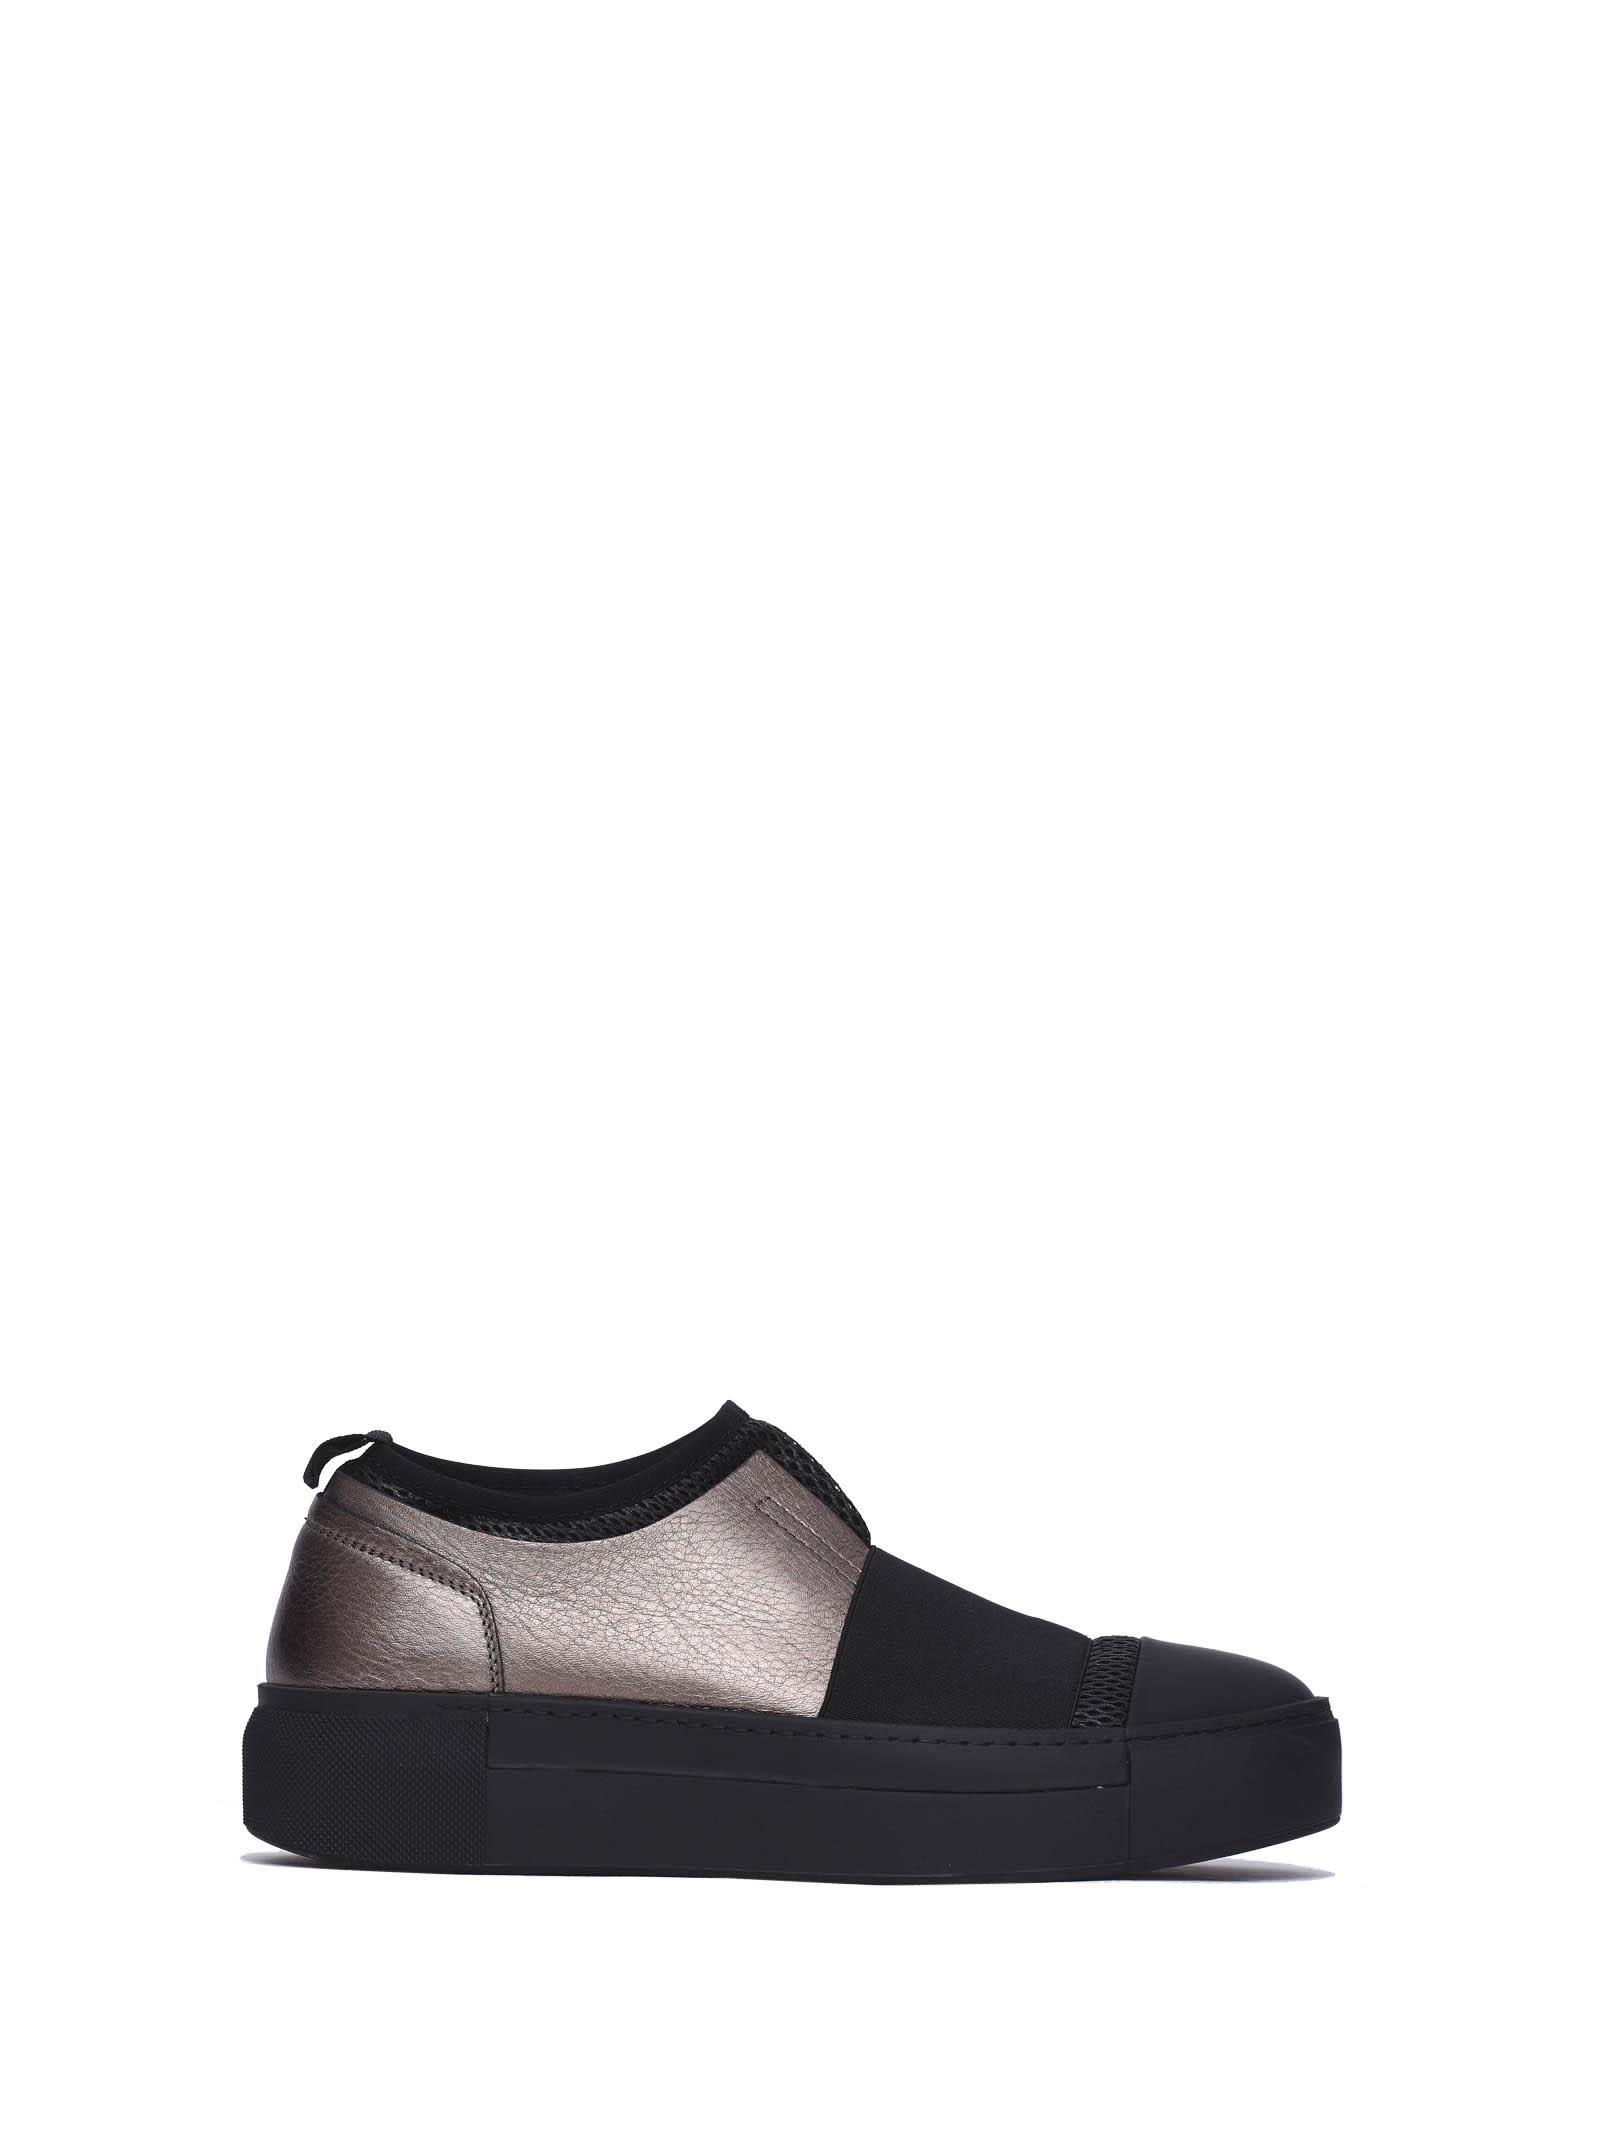 Vic Matie Slip-on Shoes With Elastic And Metallic Leather In Nero ...